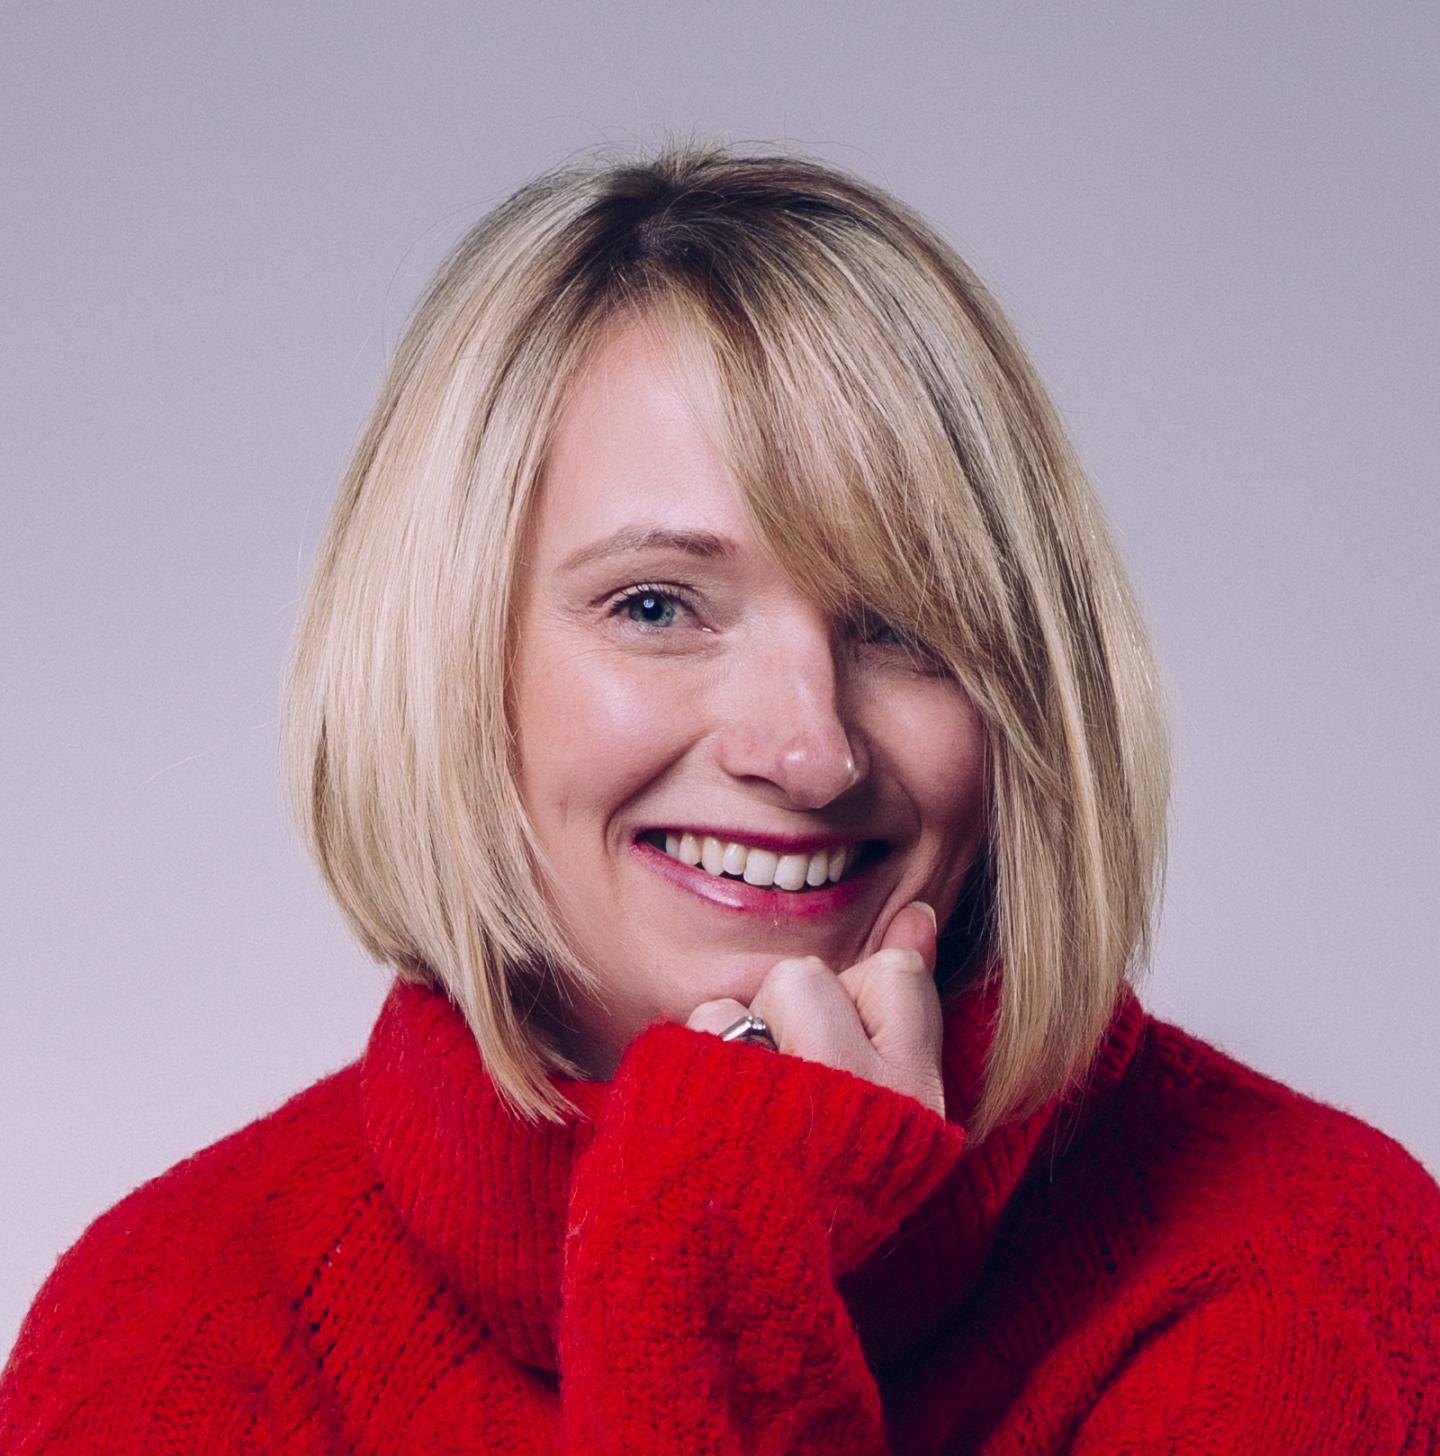 A photograph of Helen Dodd. Helen is a white woman with blonde, shoulder-length hair. She wears a red jumper.